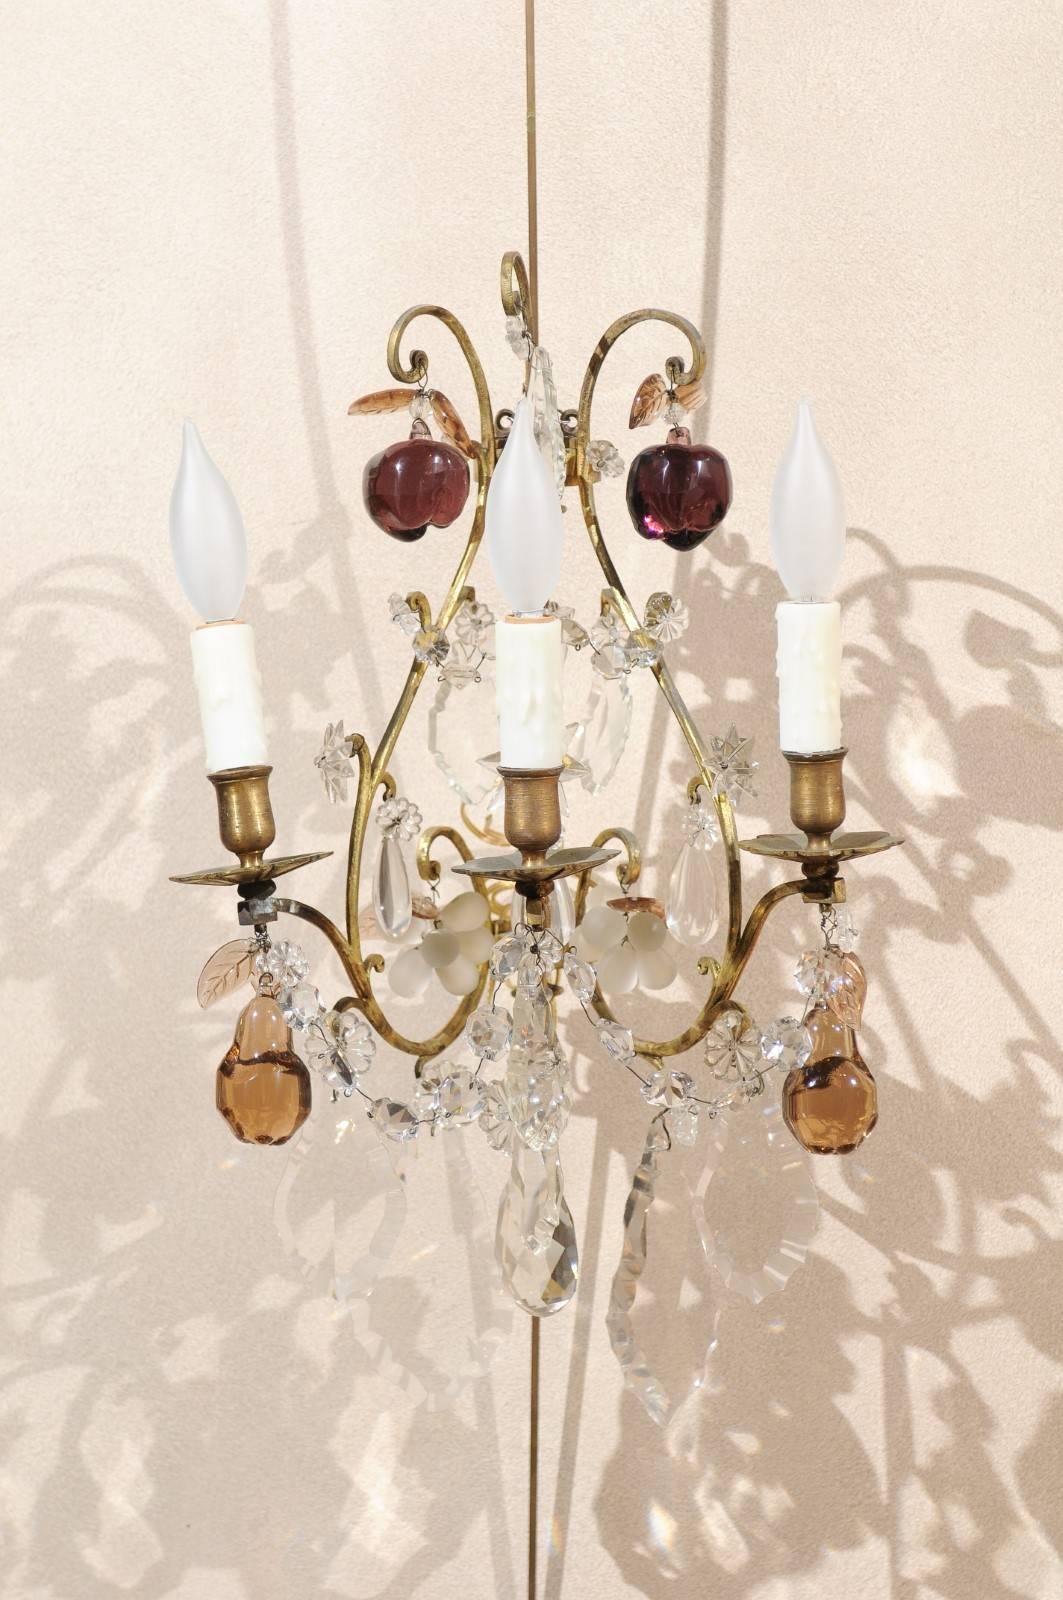 Pair of vintage French bronze and crystal sconces, circa 1950.
These sconces will catch your eye when you walk into a room. They have brilliant large crystals with a variety of small fruit on some arms. The elongated bronze inverted heart shape